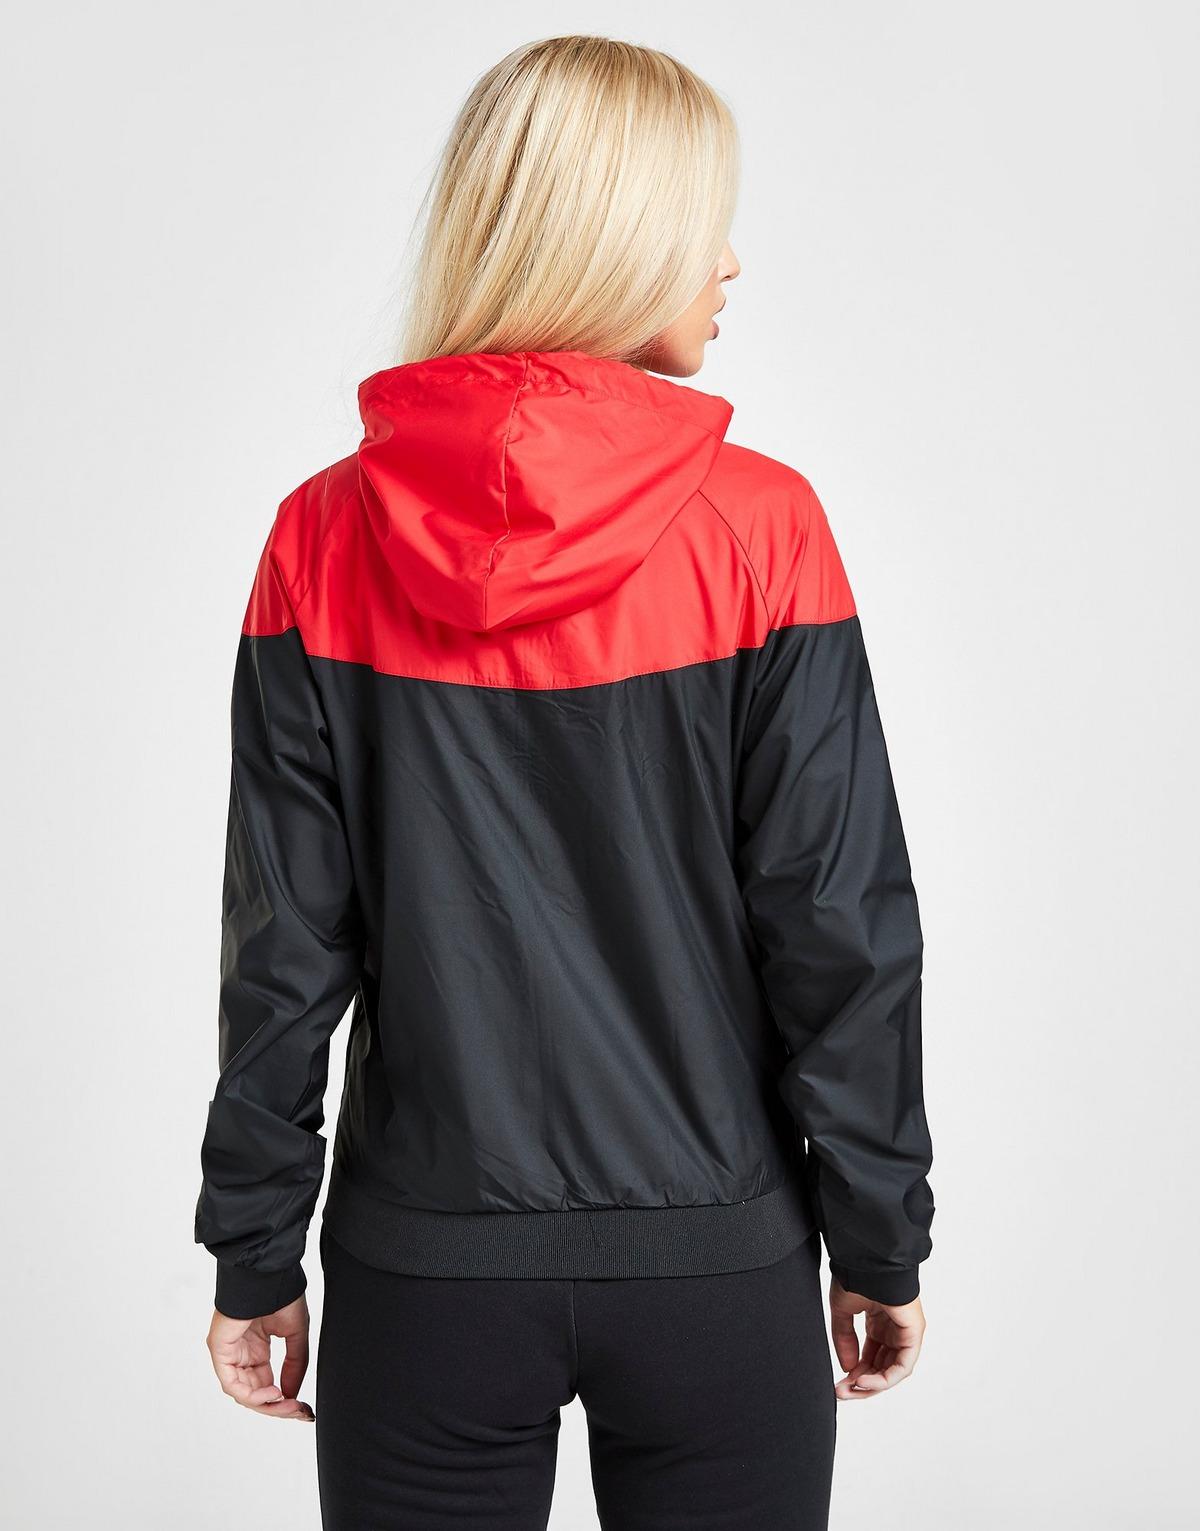 Nike Synthetic Liverpool Fc Windrunner Jacket in Black/University Red ...